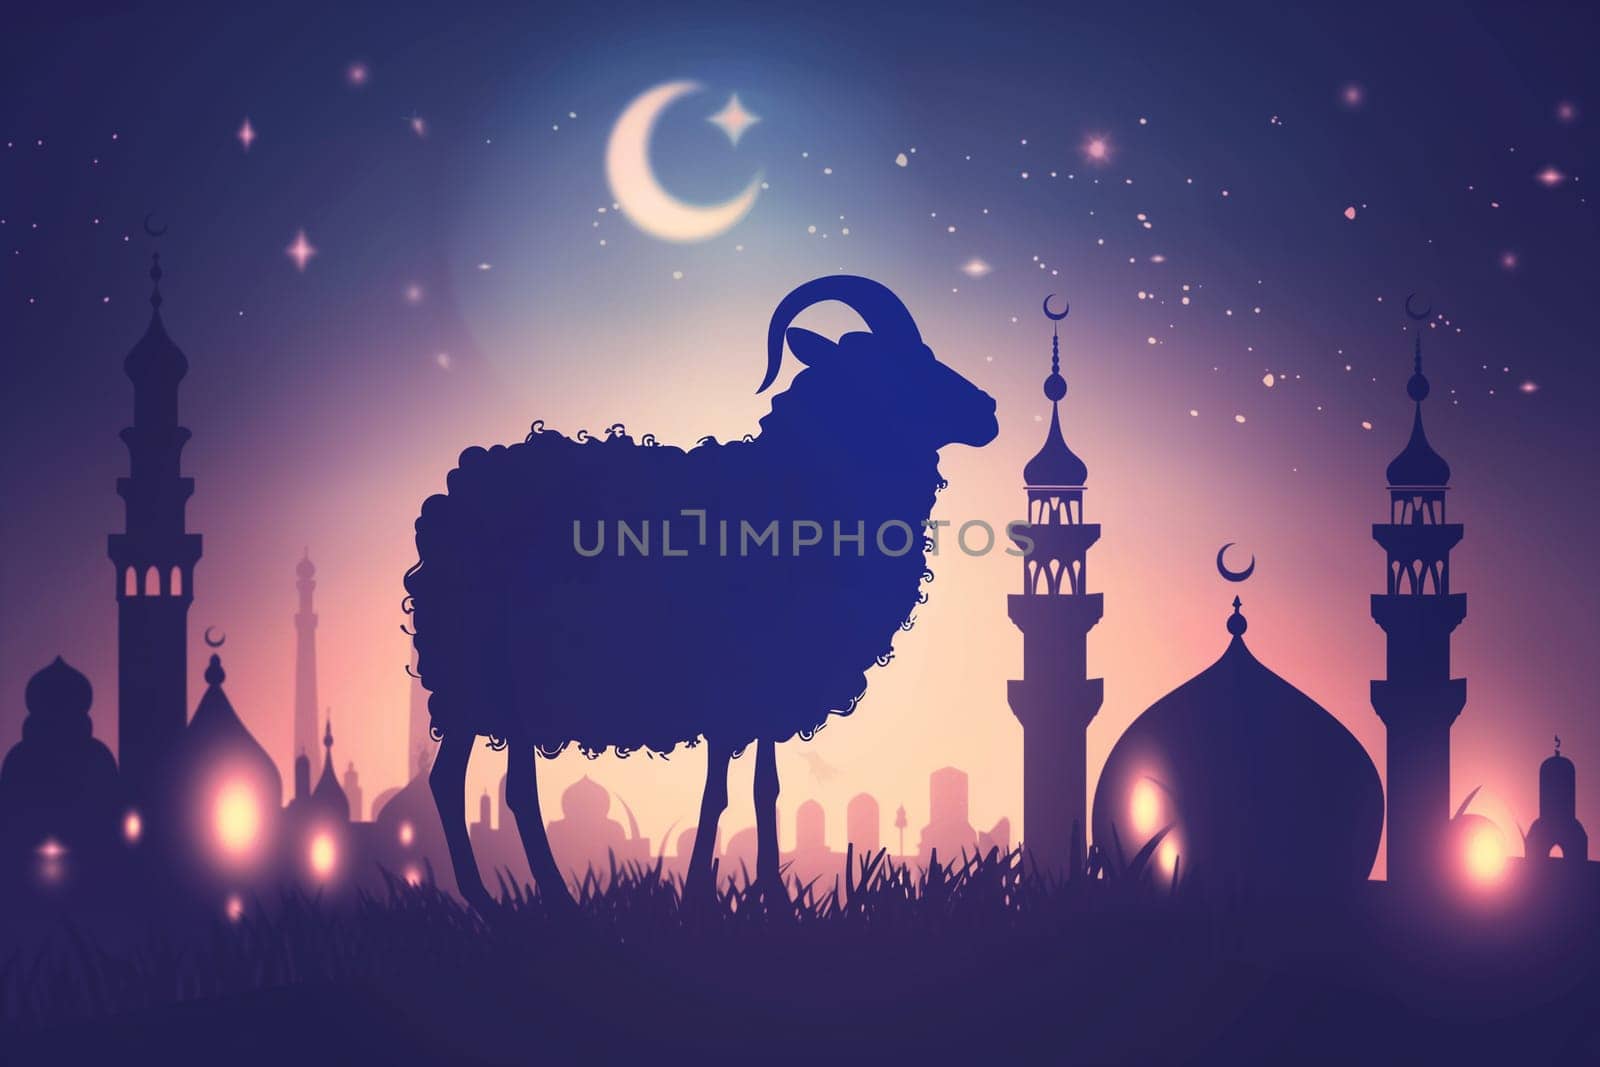 A silhouetted sheep stands before a moonlit skyline of mosques and minarets during the celebration of Kurban Bayram.